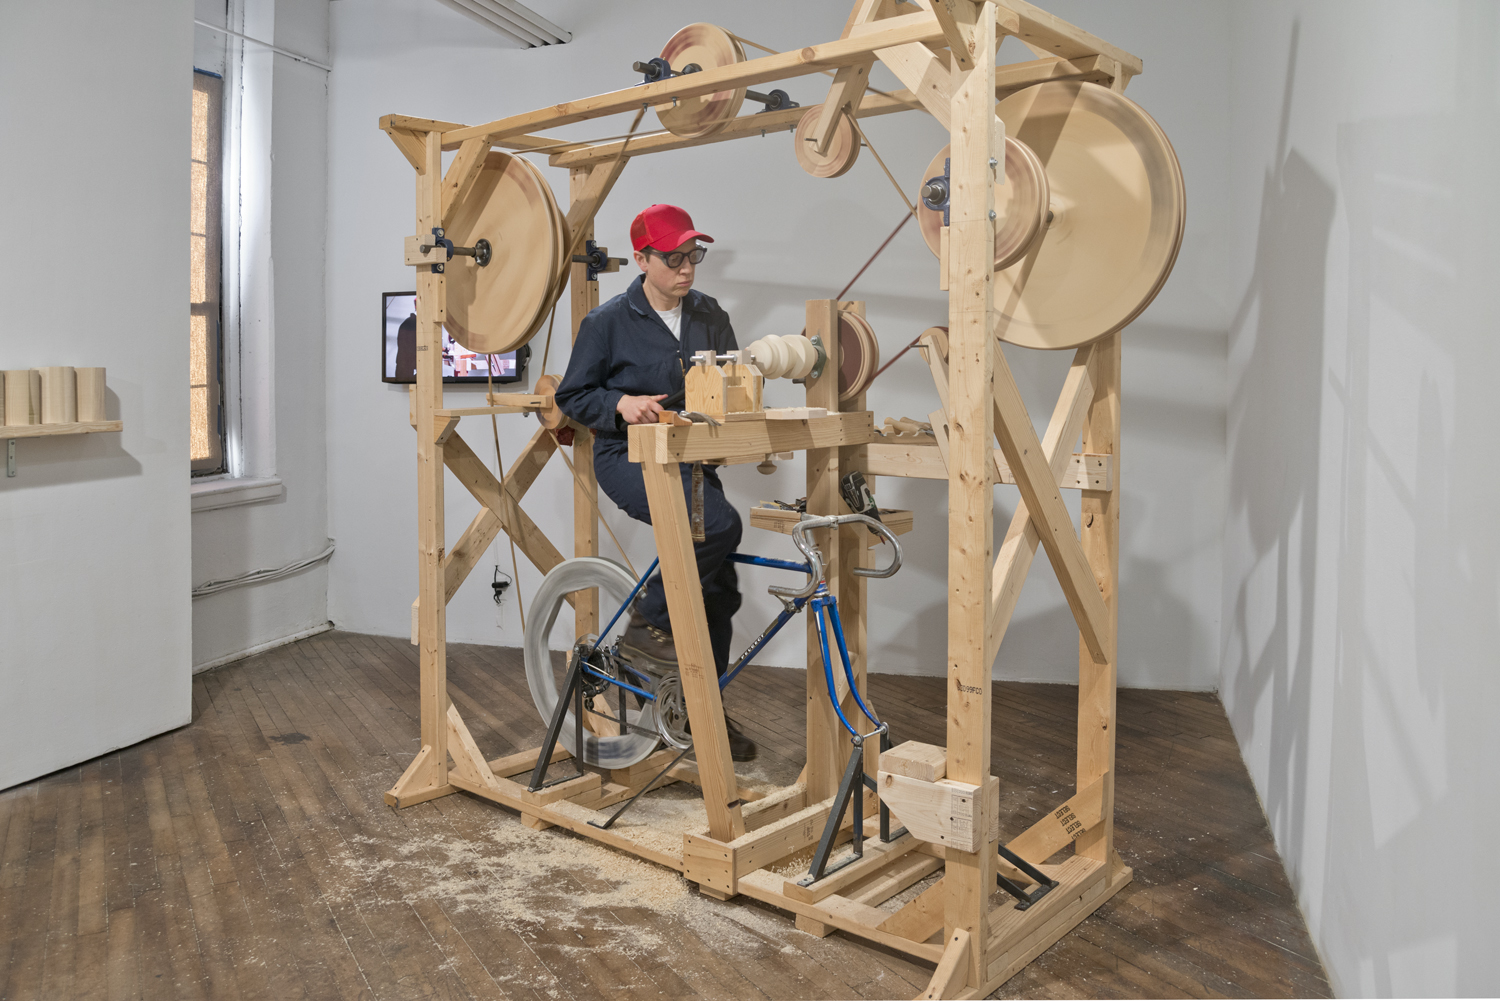 Artist Gina Siepel interacting with large, wooden, mechanical work titled "self made"